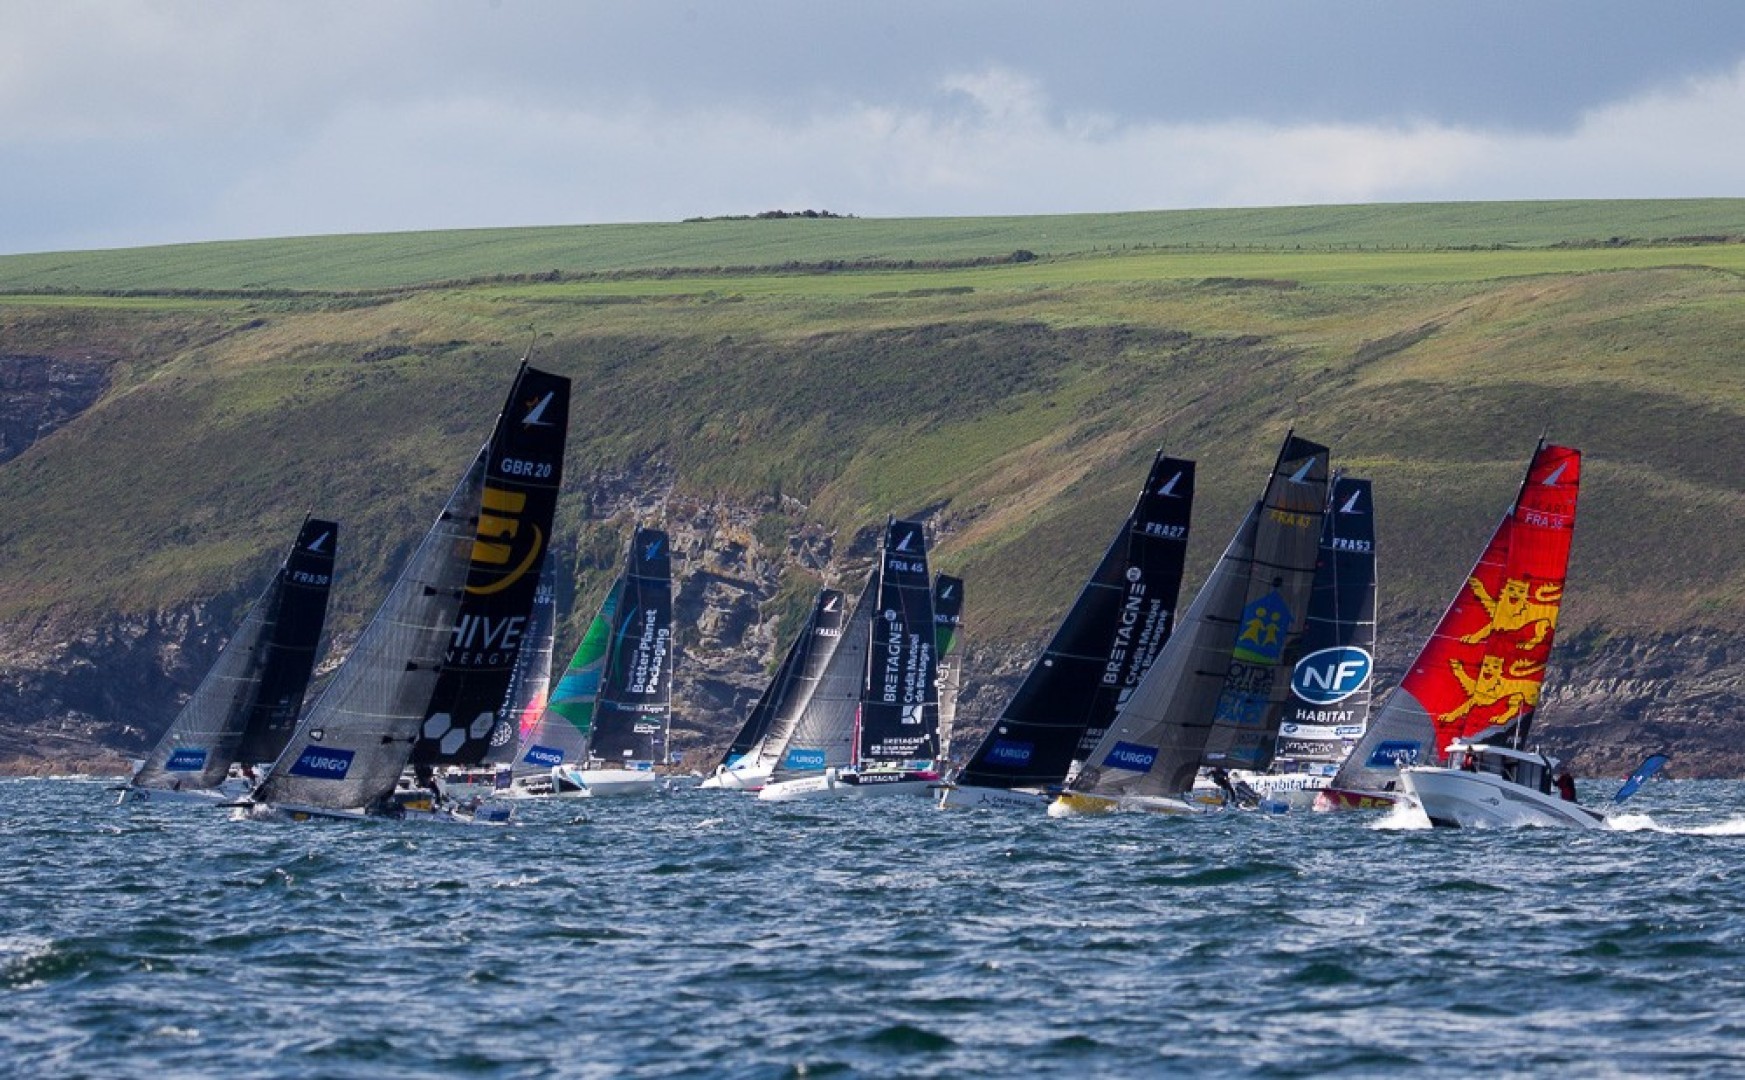 Start from Kinsale in 2019 © Alexis Courcoux